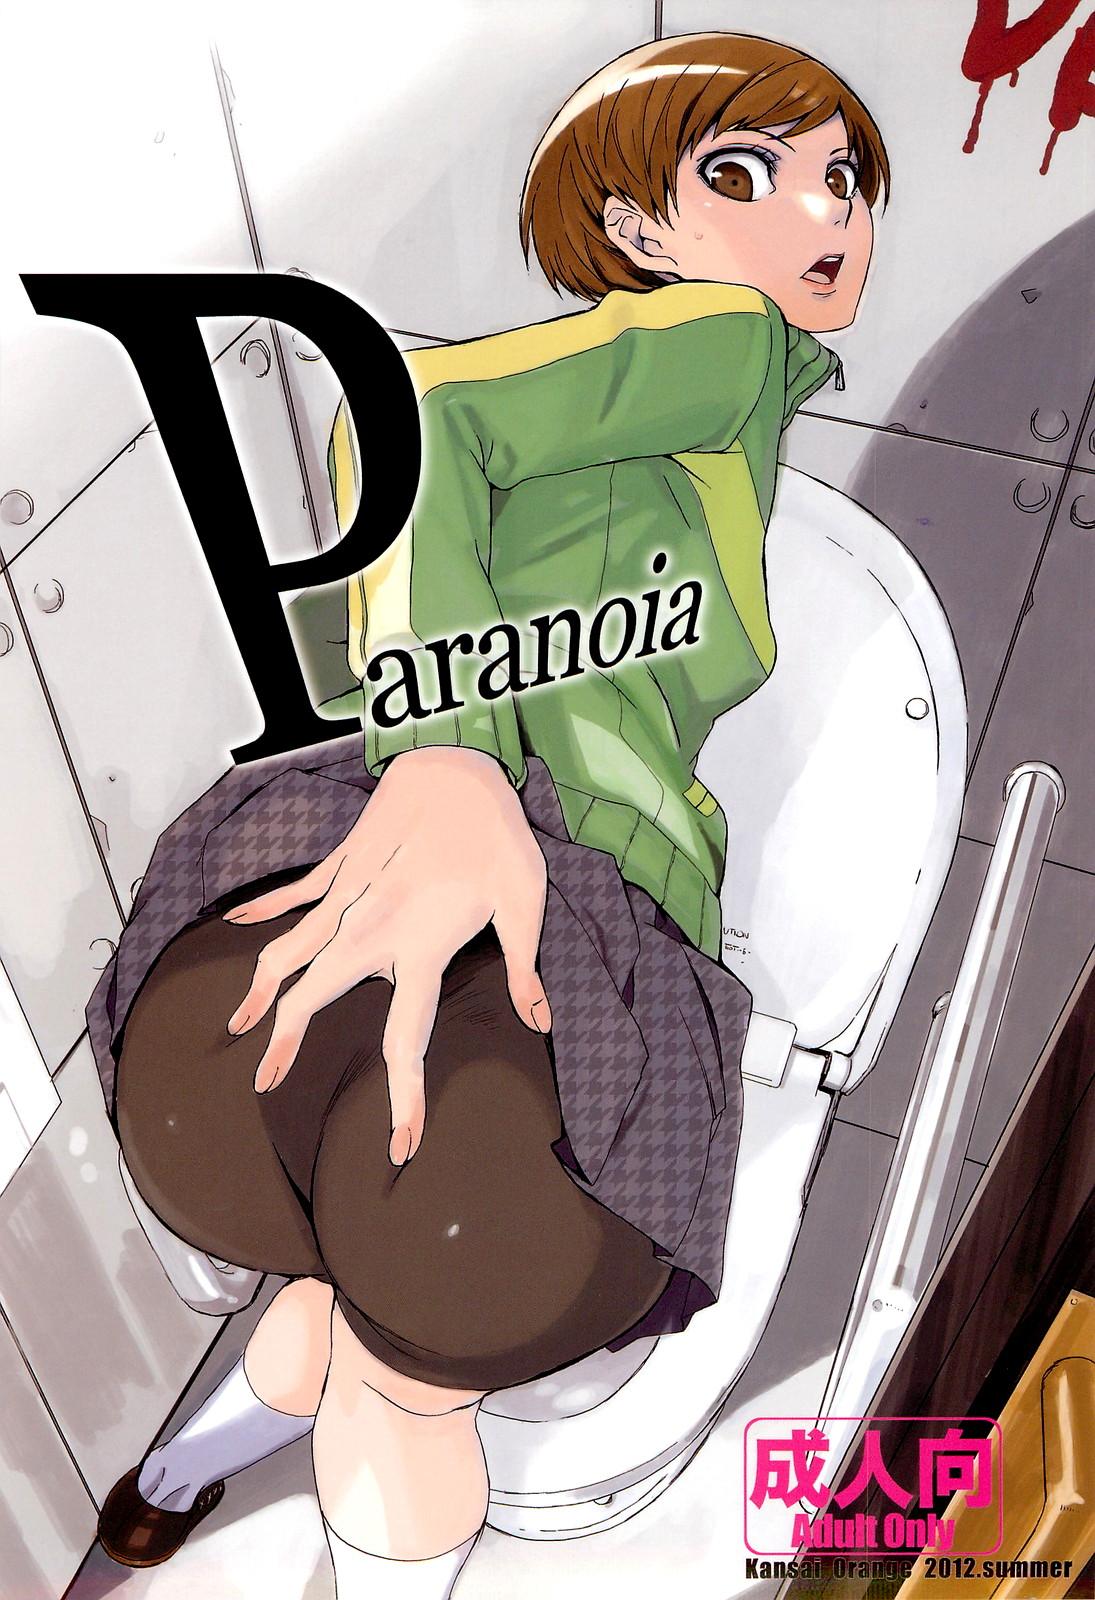 Woman Paranoia - Persona 4 Pounded - Picture 1